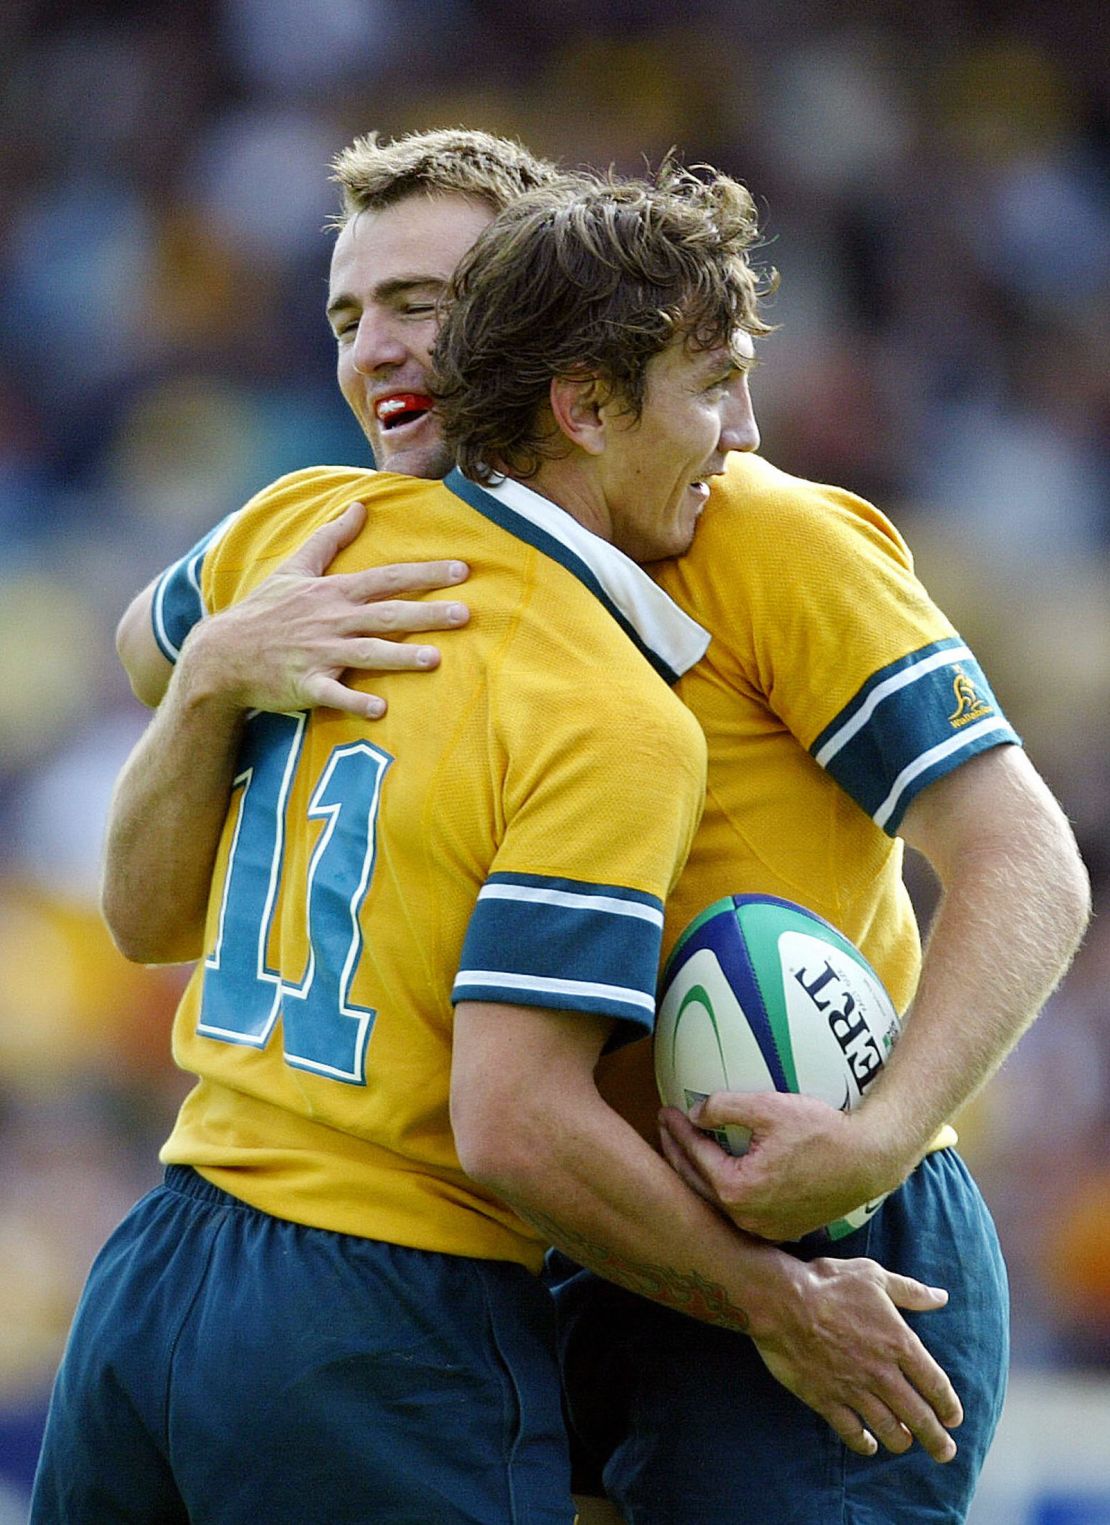 ADELAIDE, AUSTRALIA:  Australian fullback Chris Latham (L) is congratuled by his teammate wing Mat Rogers during the Rugby World Cup Pool A match between Australia and Namibia at Adelaide oval in Adelaide, 25 october 2003. Australia beat Namibia 142-0.  AFP PHOTO/ Christophe SIMON  (Photo credit should read CHRISTOPHE SIMON/AFP via Getty Images)